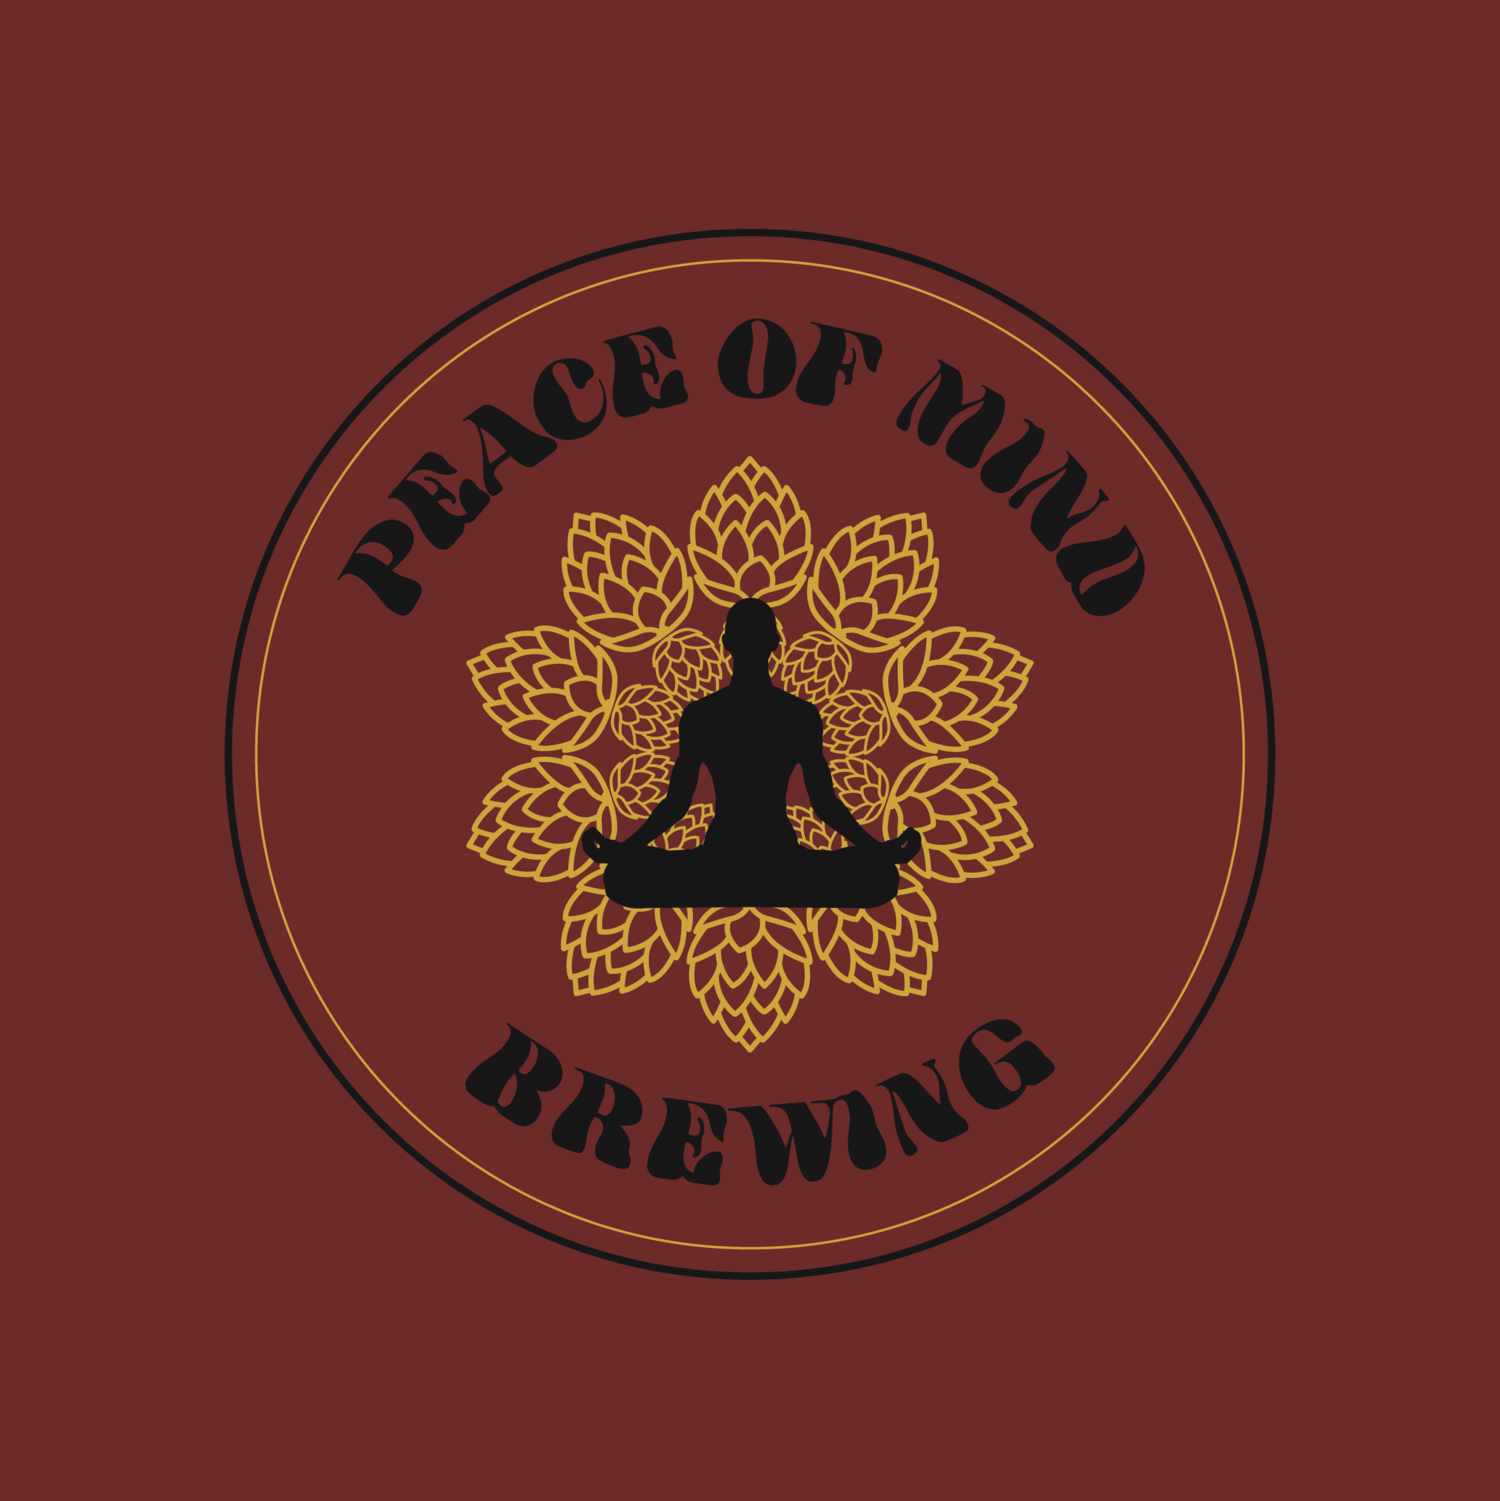 Peace of Mind Brewing